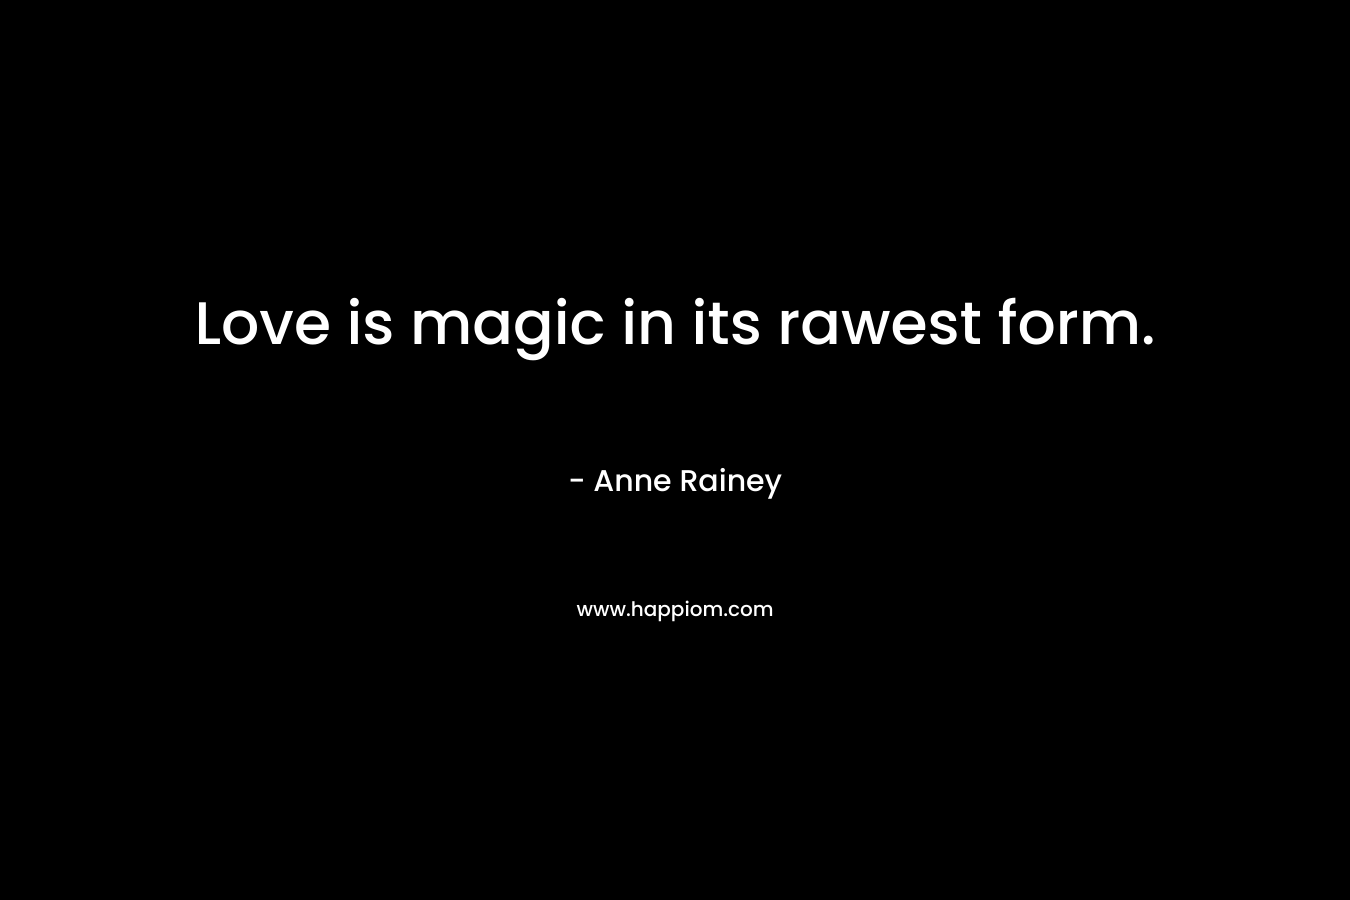 Love is magic in its rawest form.